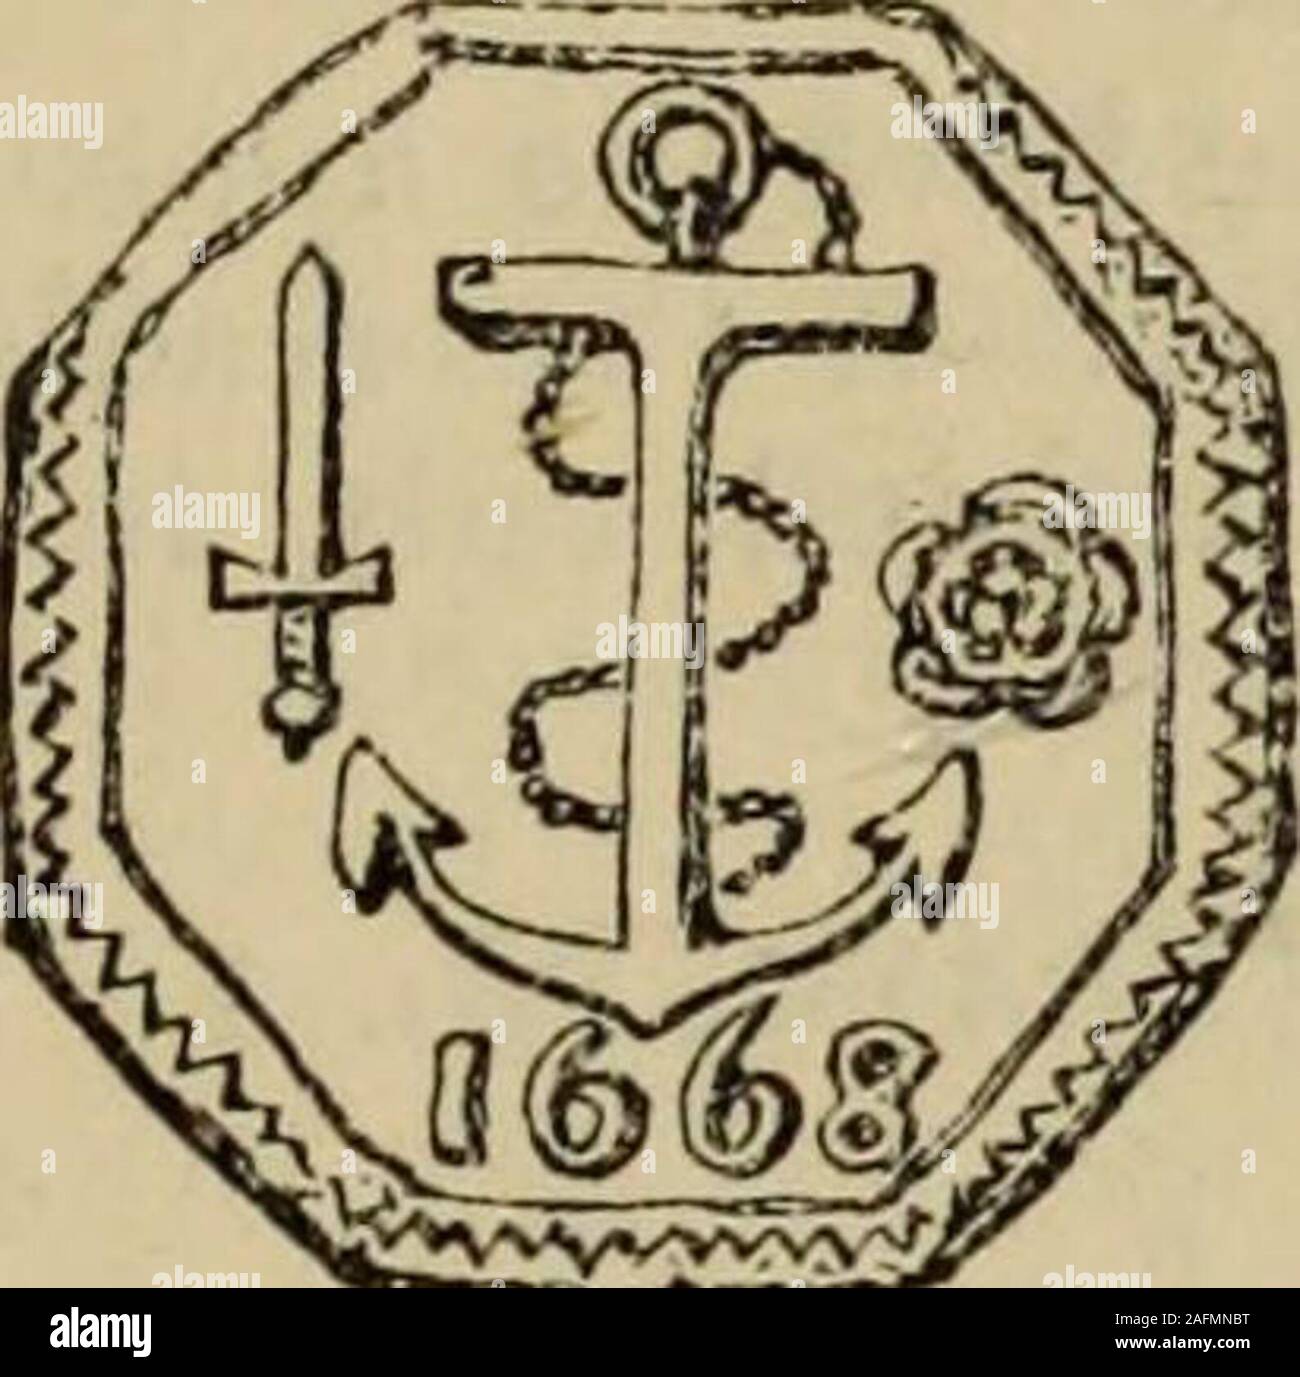 . Trade tokens issued in the seventeenth century in England, Wales, and Ireland. nd again, by feoffment of March 19, 1678, by StephenPittway—unto tiustees (being Quakers), their heirs and assigns, for such purposesonly as between the parties and other persons concerned were formerly agreedupon, and no otherwise. The property is described as a small piece of gardenground in Bengeworth, adjoining the Parsonage Close, and behind the dwelling-house of the said Edward Pittway. with way or passage through the yard gates onthe south side of the said dwelling house. An engraving of this token appears Stock Photo